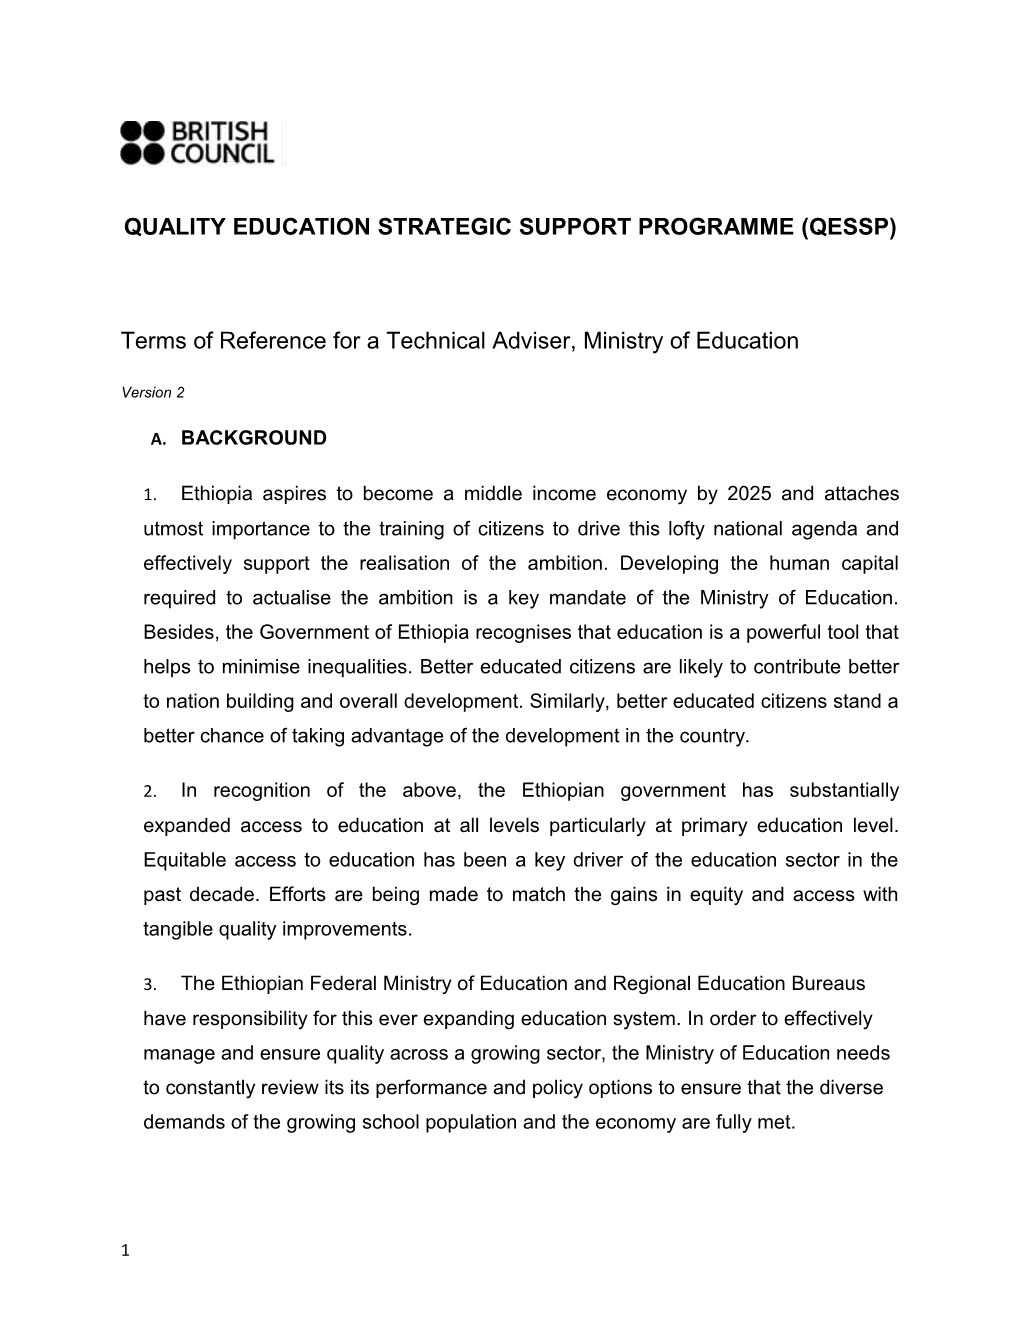 Quality Education Strategic Support Programme (Qessp)